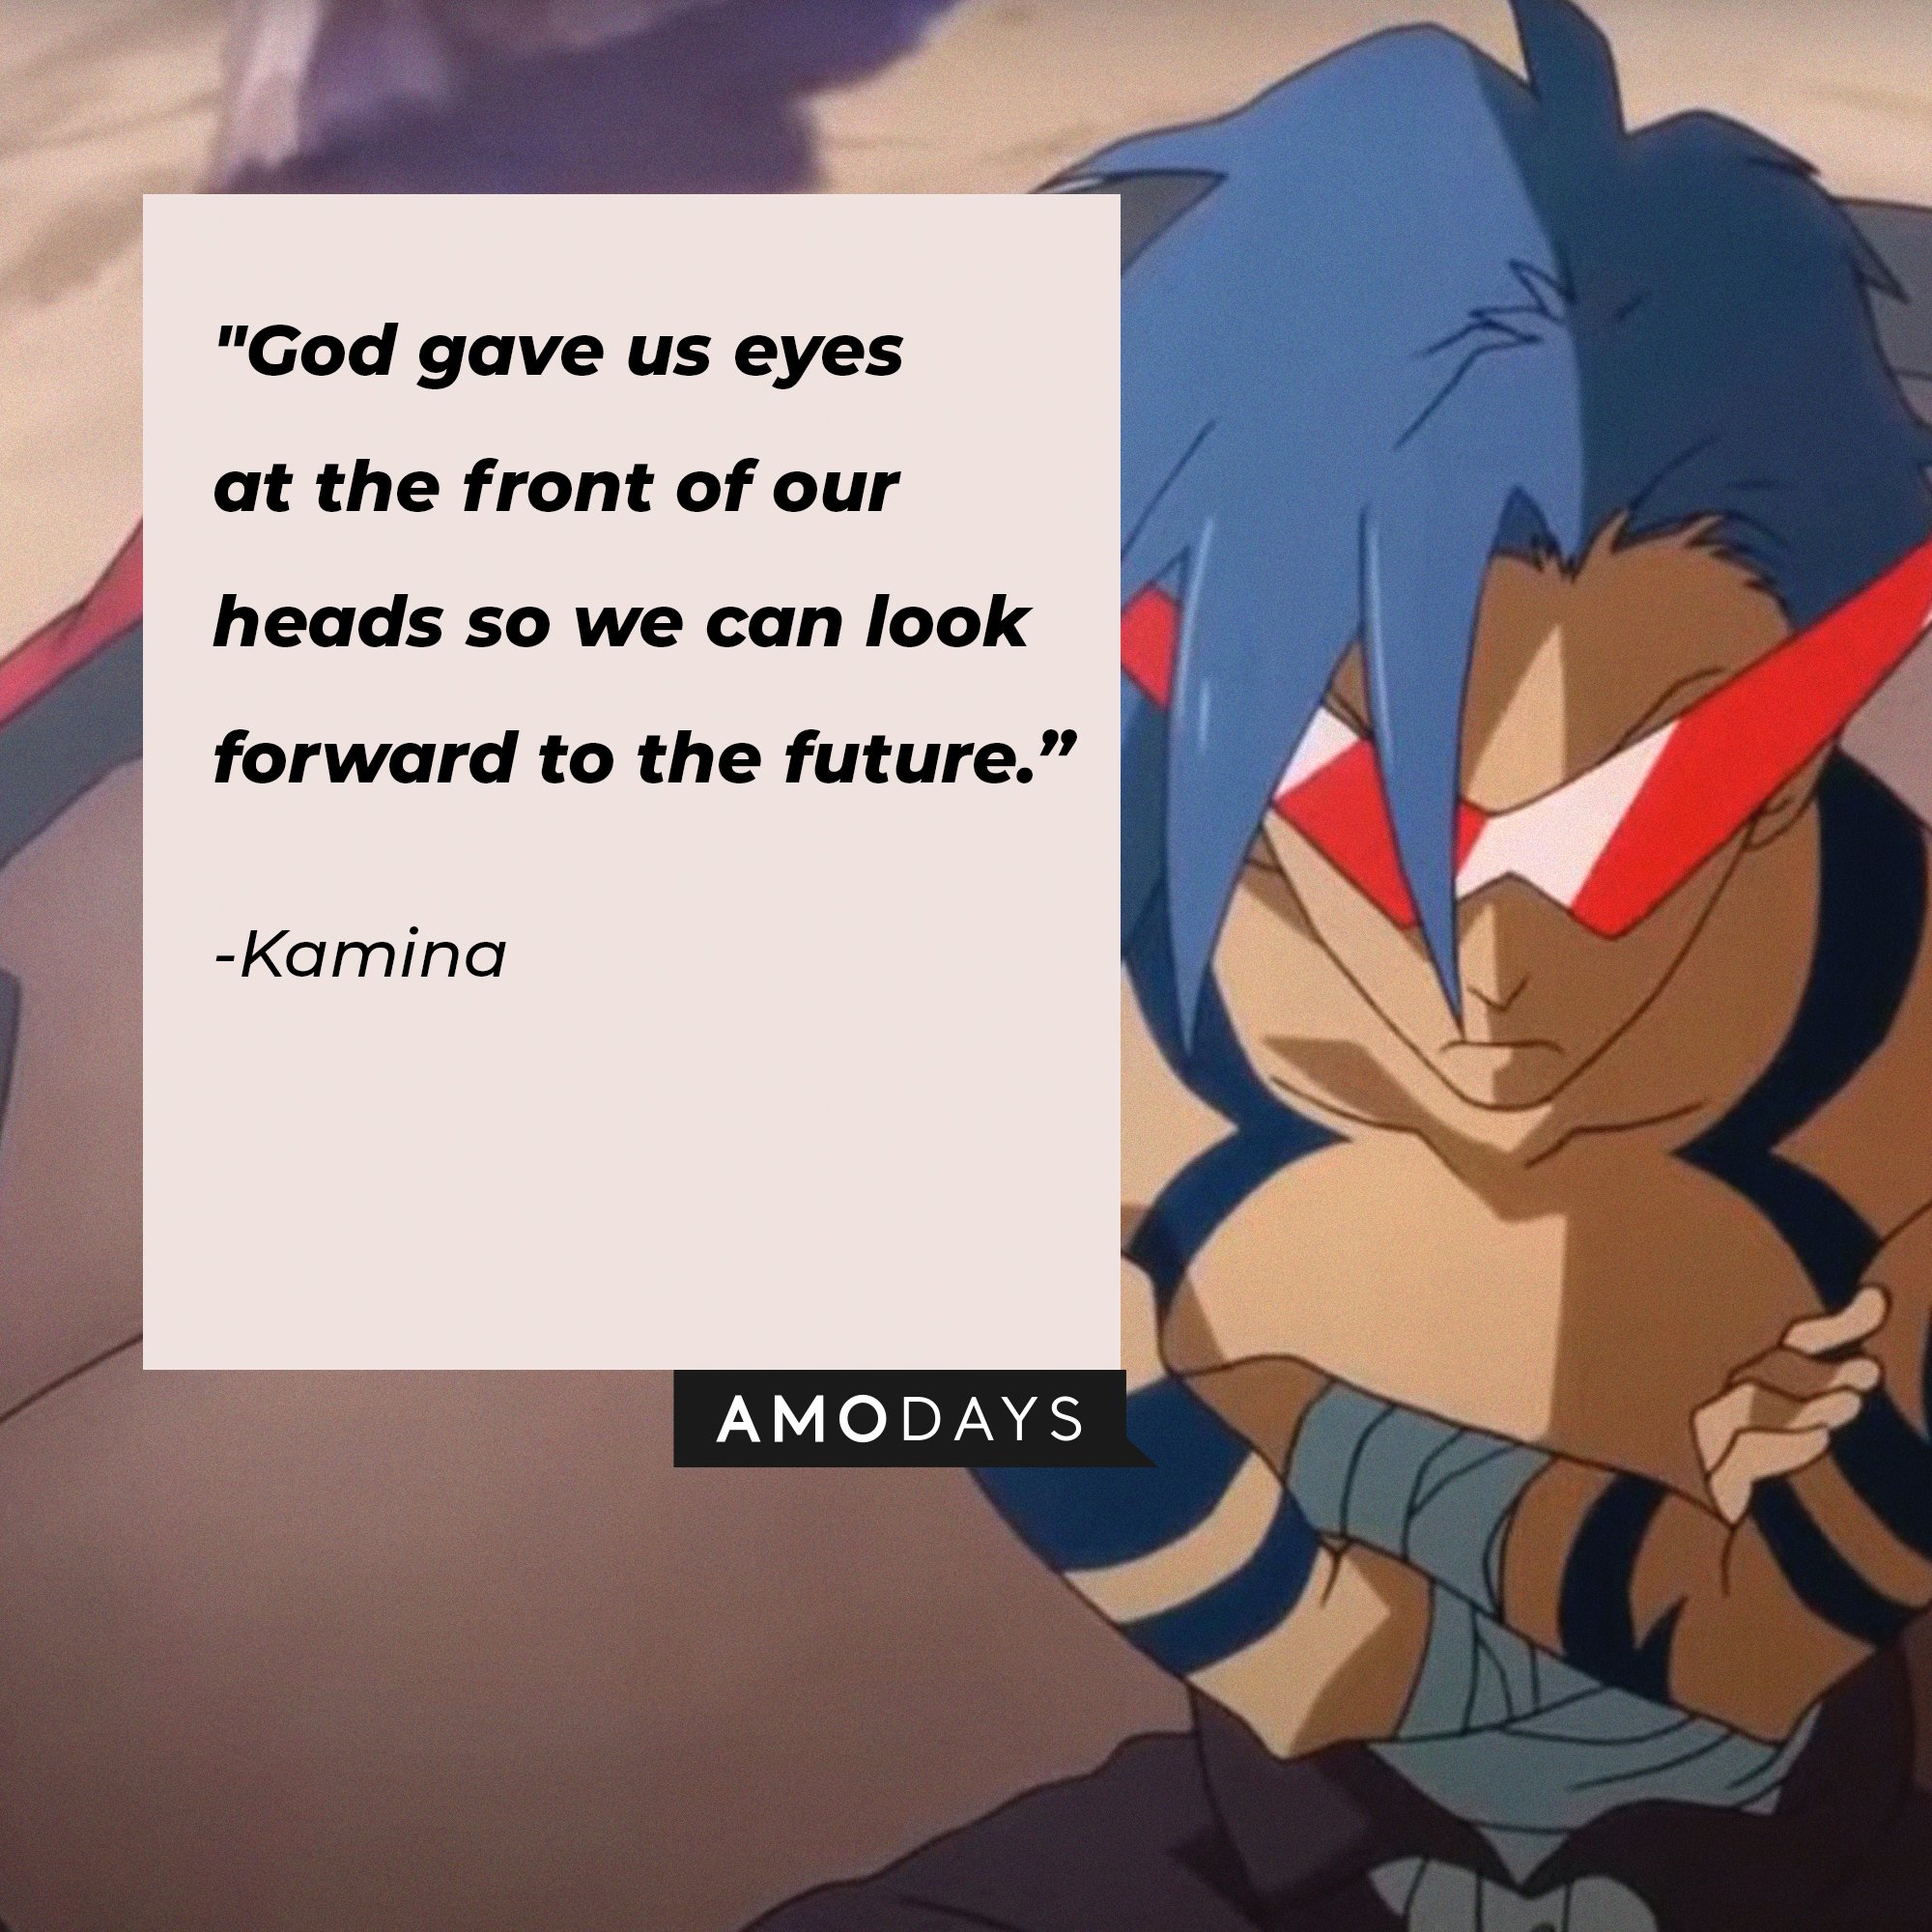 Kamina's quote: "God gave us eyes at the front of our heads so we can look forward to the future.” | Image: AmoDays    